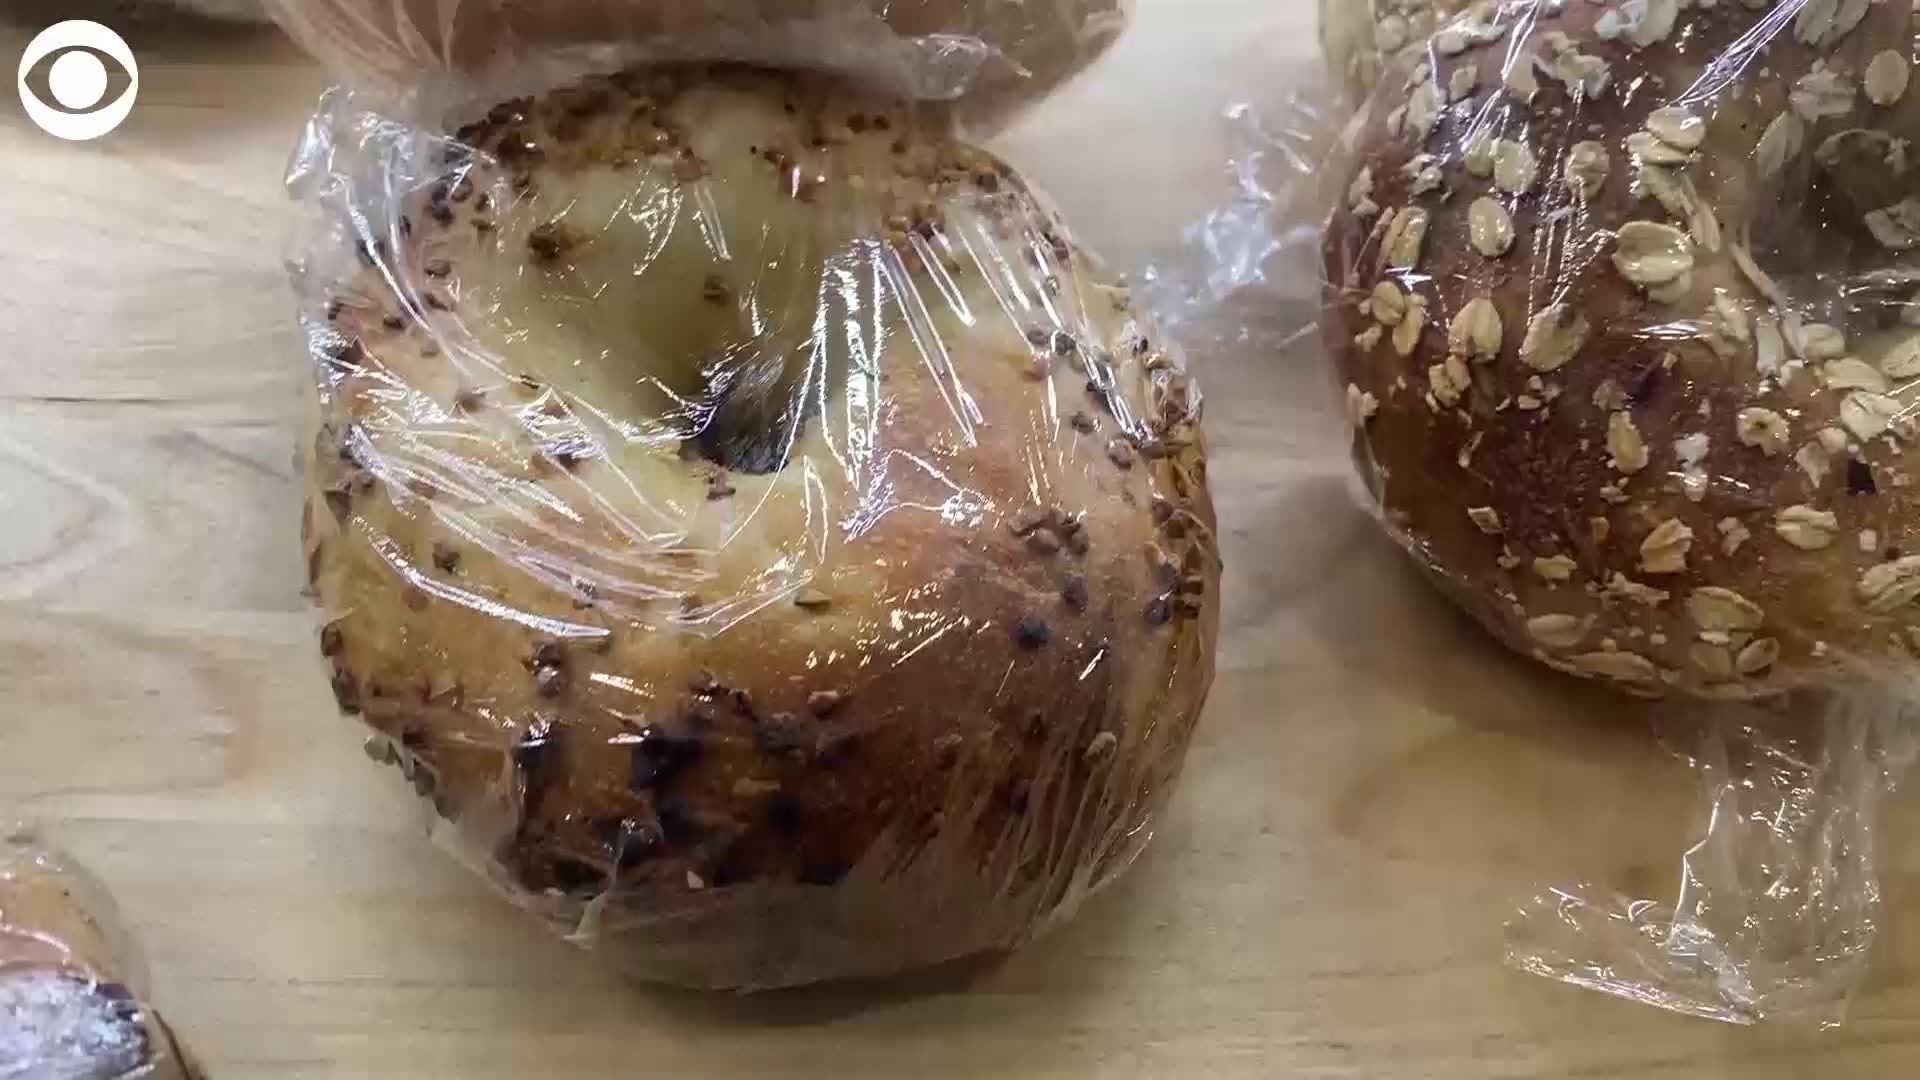 It's National Bagel Day! Here are some of the types of bagels people love most.